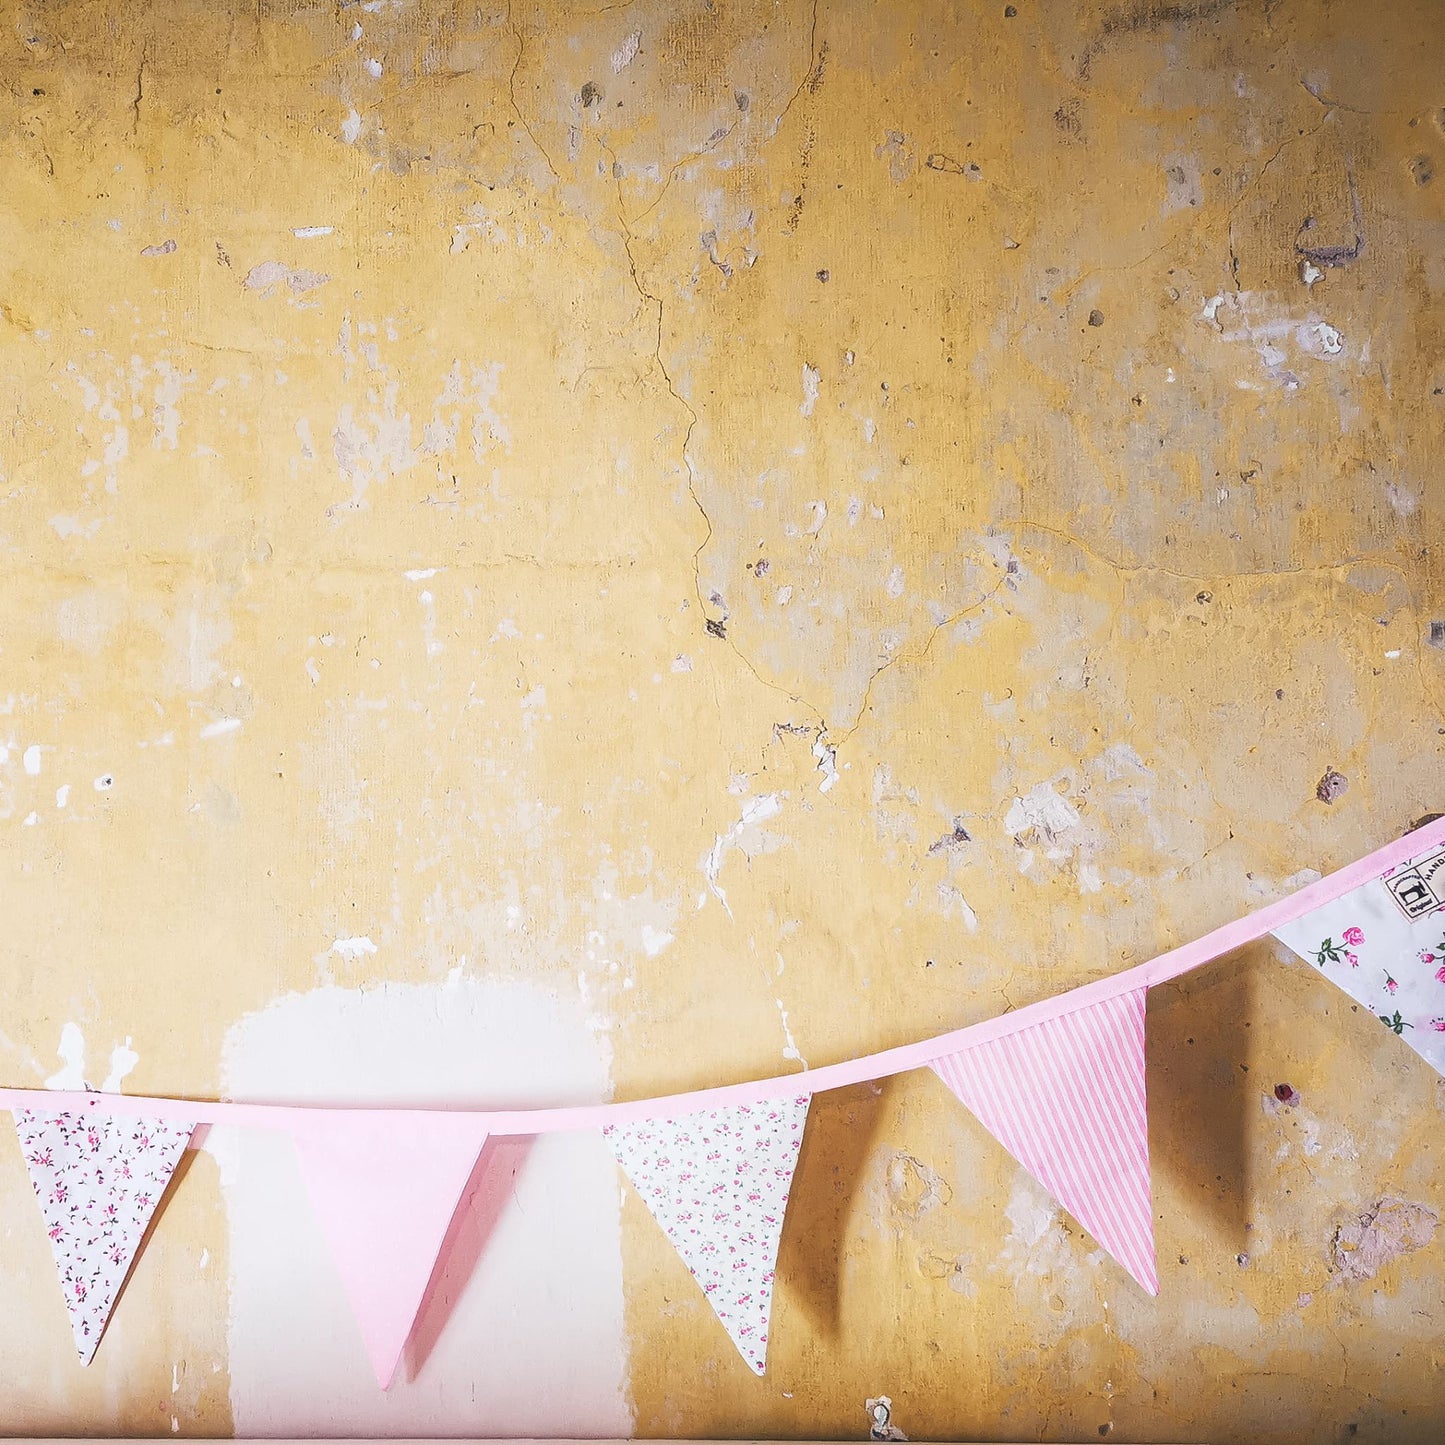 Pastel Pink Bunting Featuring dots, stripes and flowers 10 triangles on a 3m length - handmade in yorkshire by F&B - Bunting for birthdays, christenings, weddings and summer celebrations